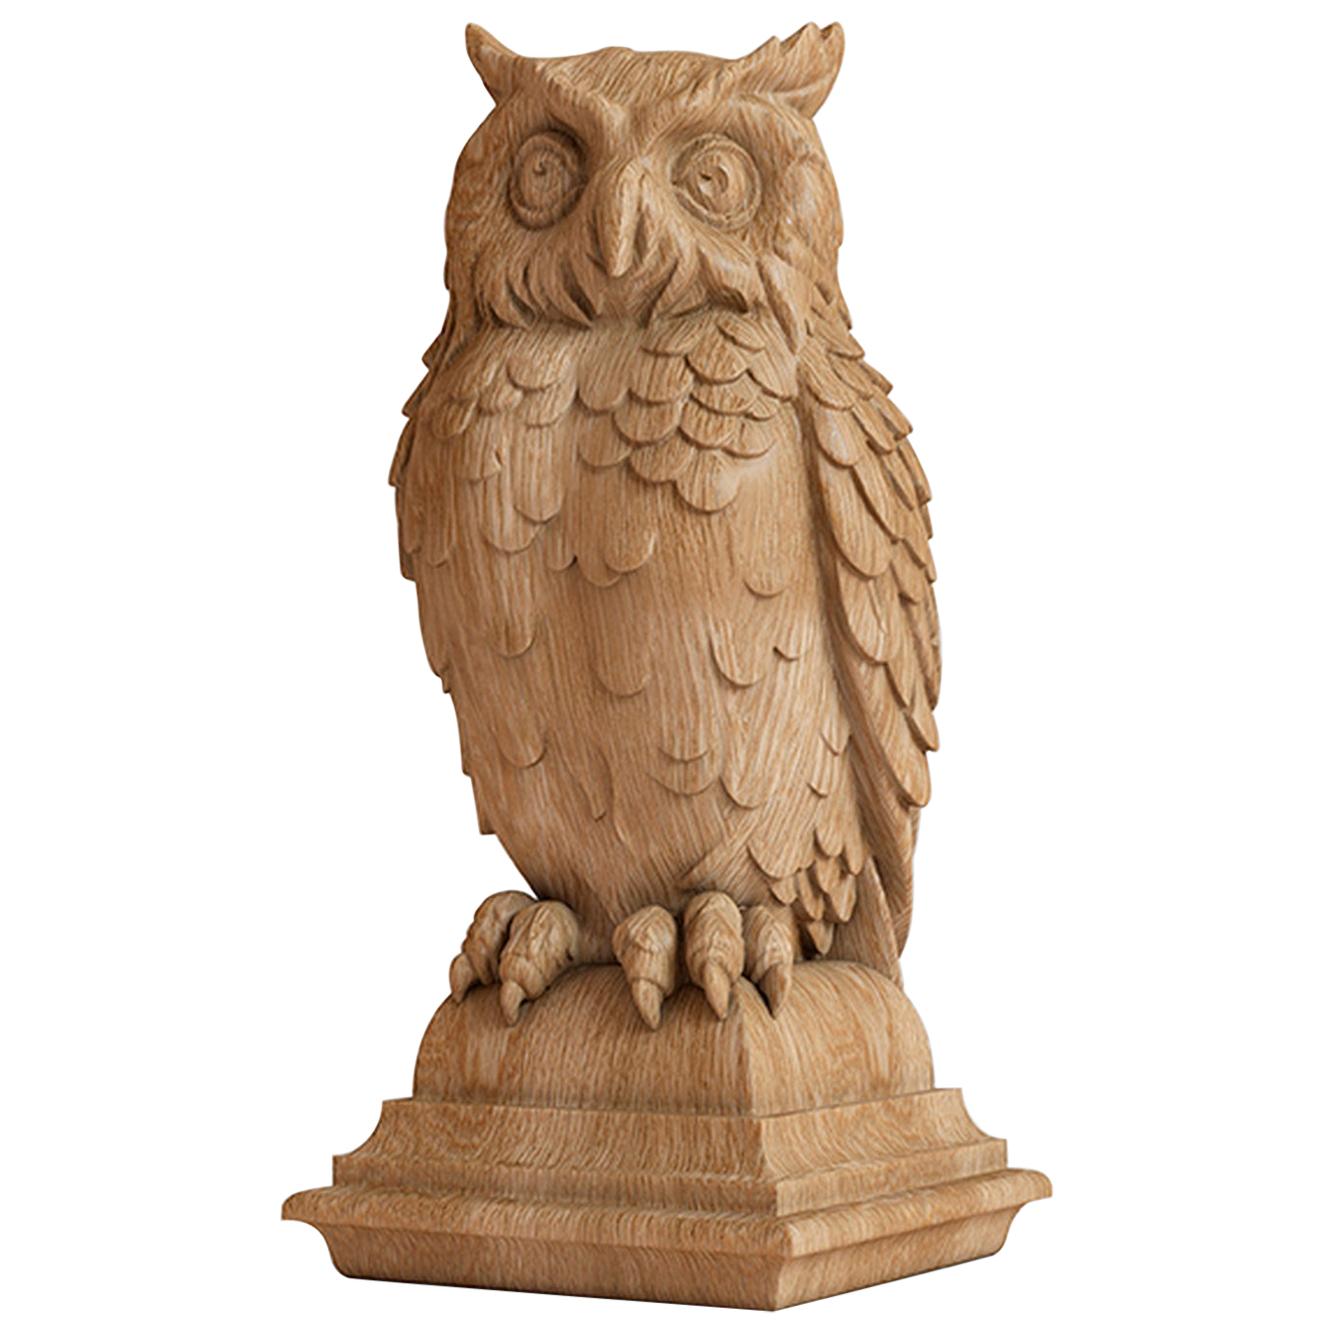 Carved Wood Statue "Owl", Newel Post Topper For Sale